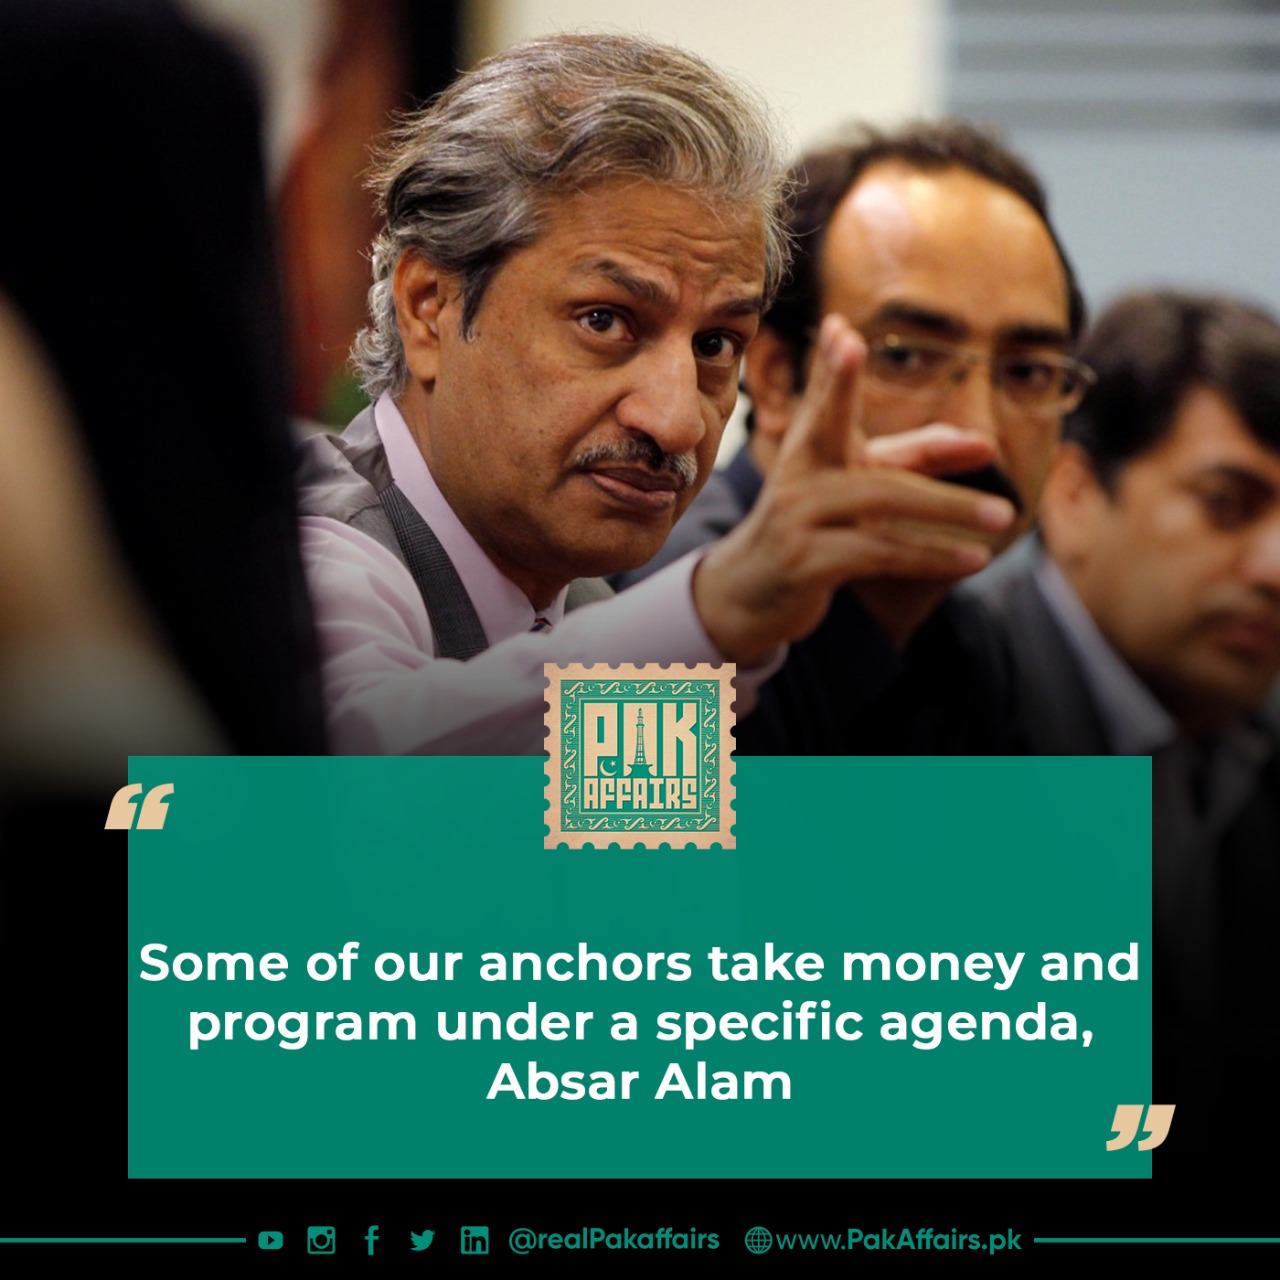 Some of our anchors take money and program under a specific agenda, Absar Alam